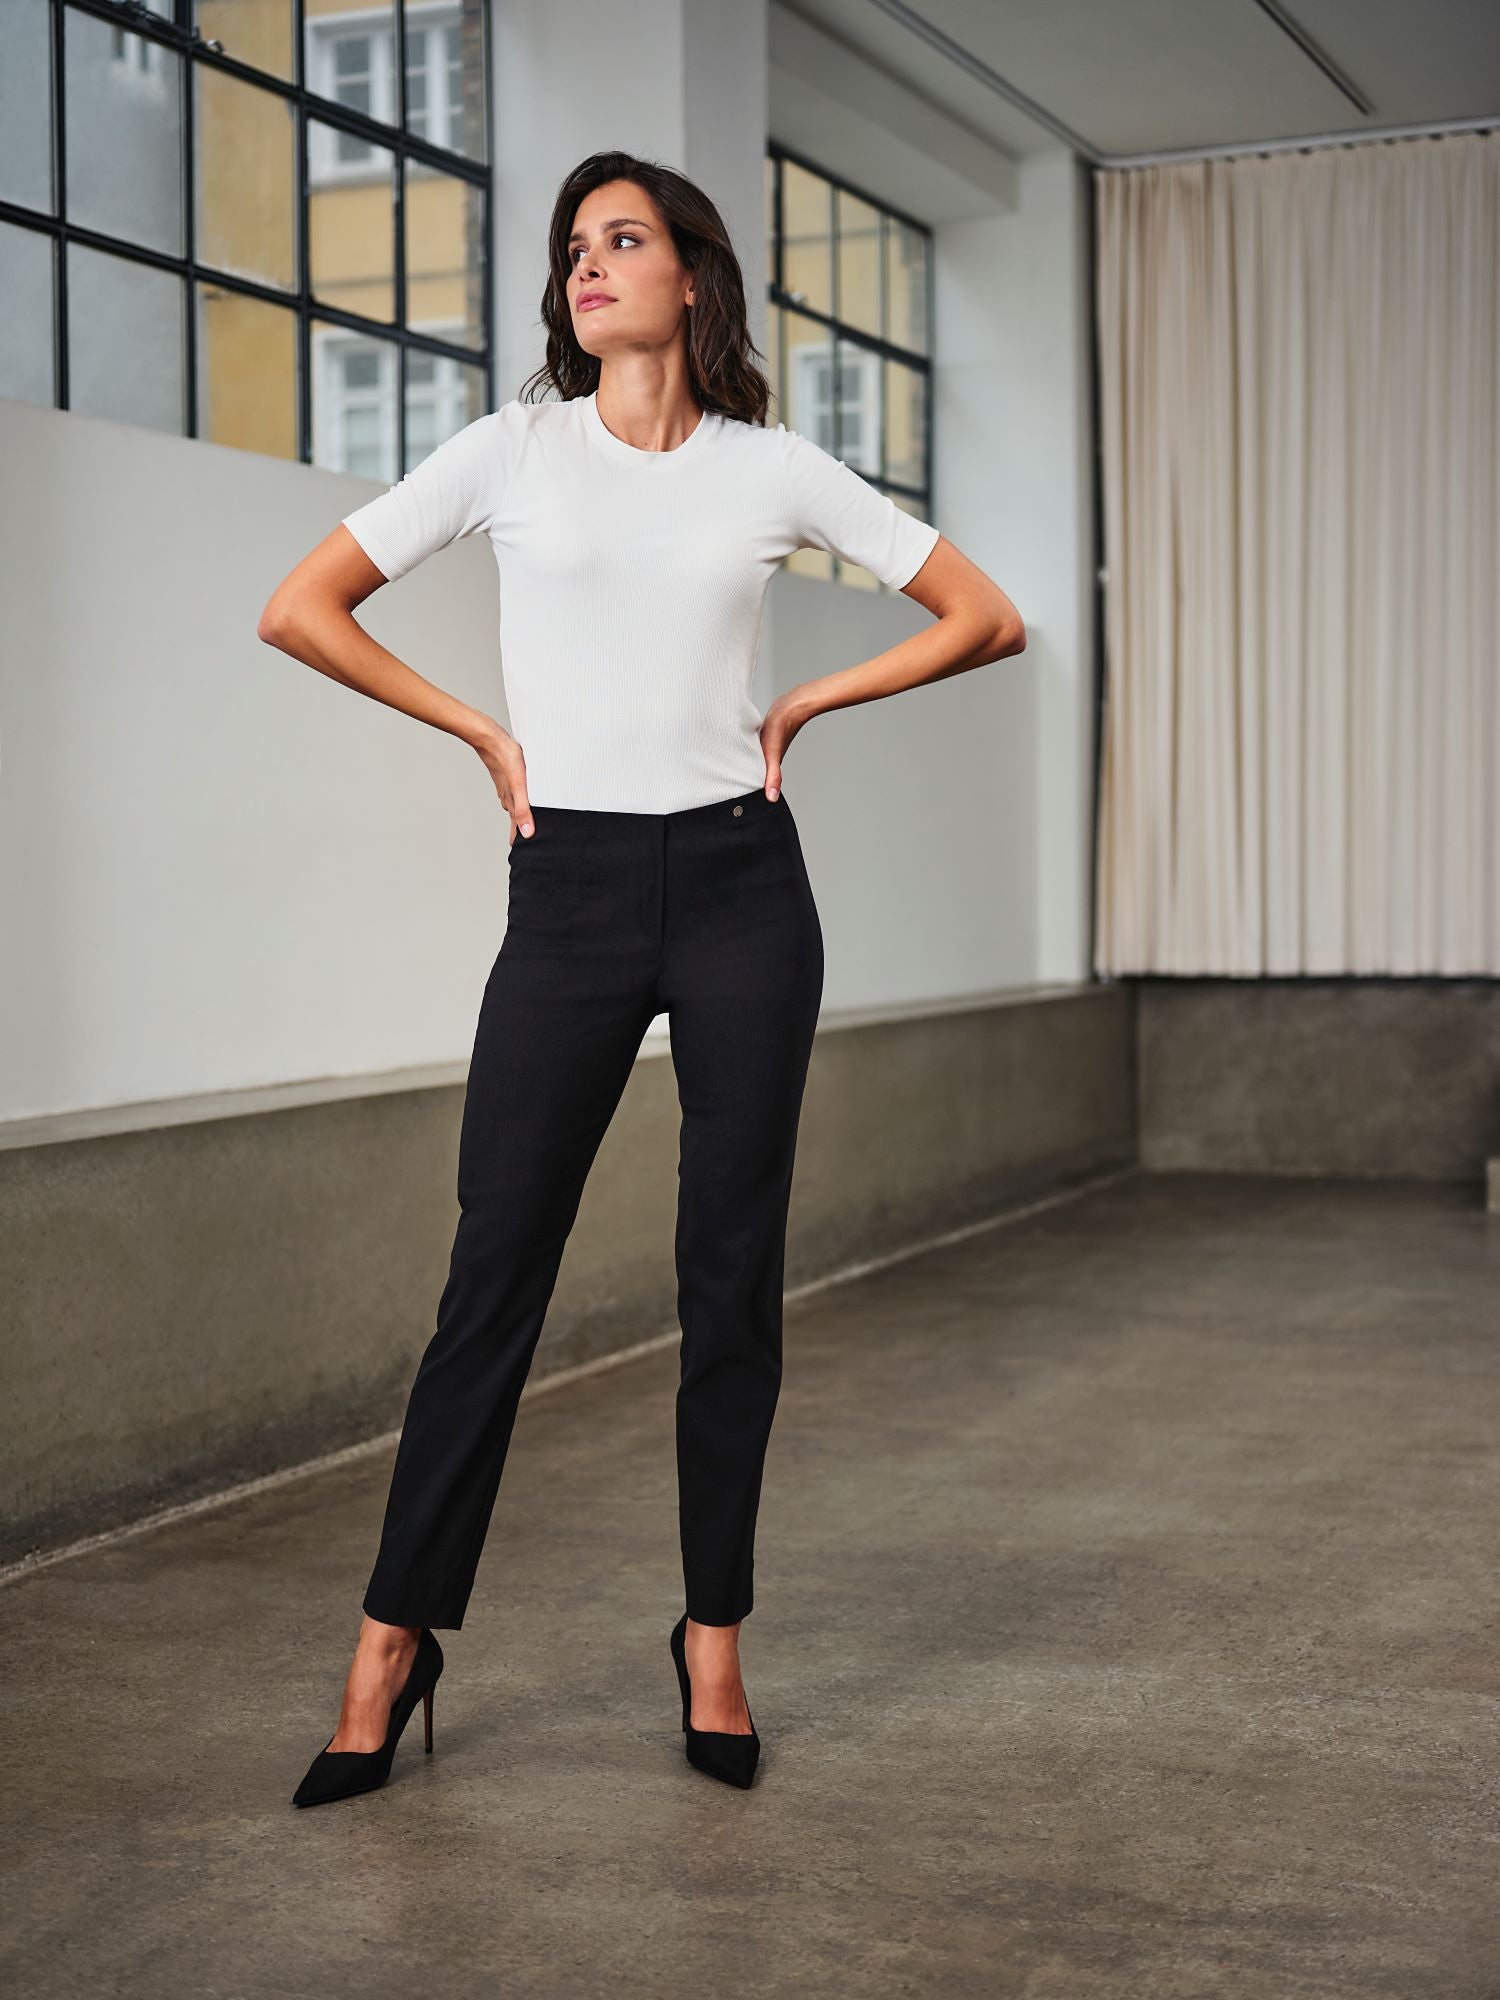 Robell Marie Full length pull on stretch trousers 51412 5499